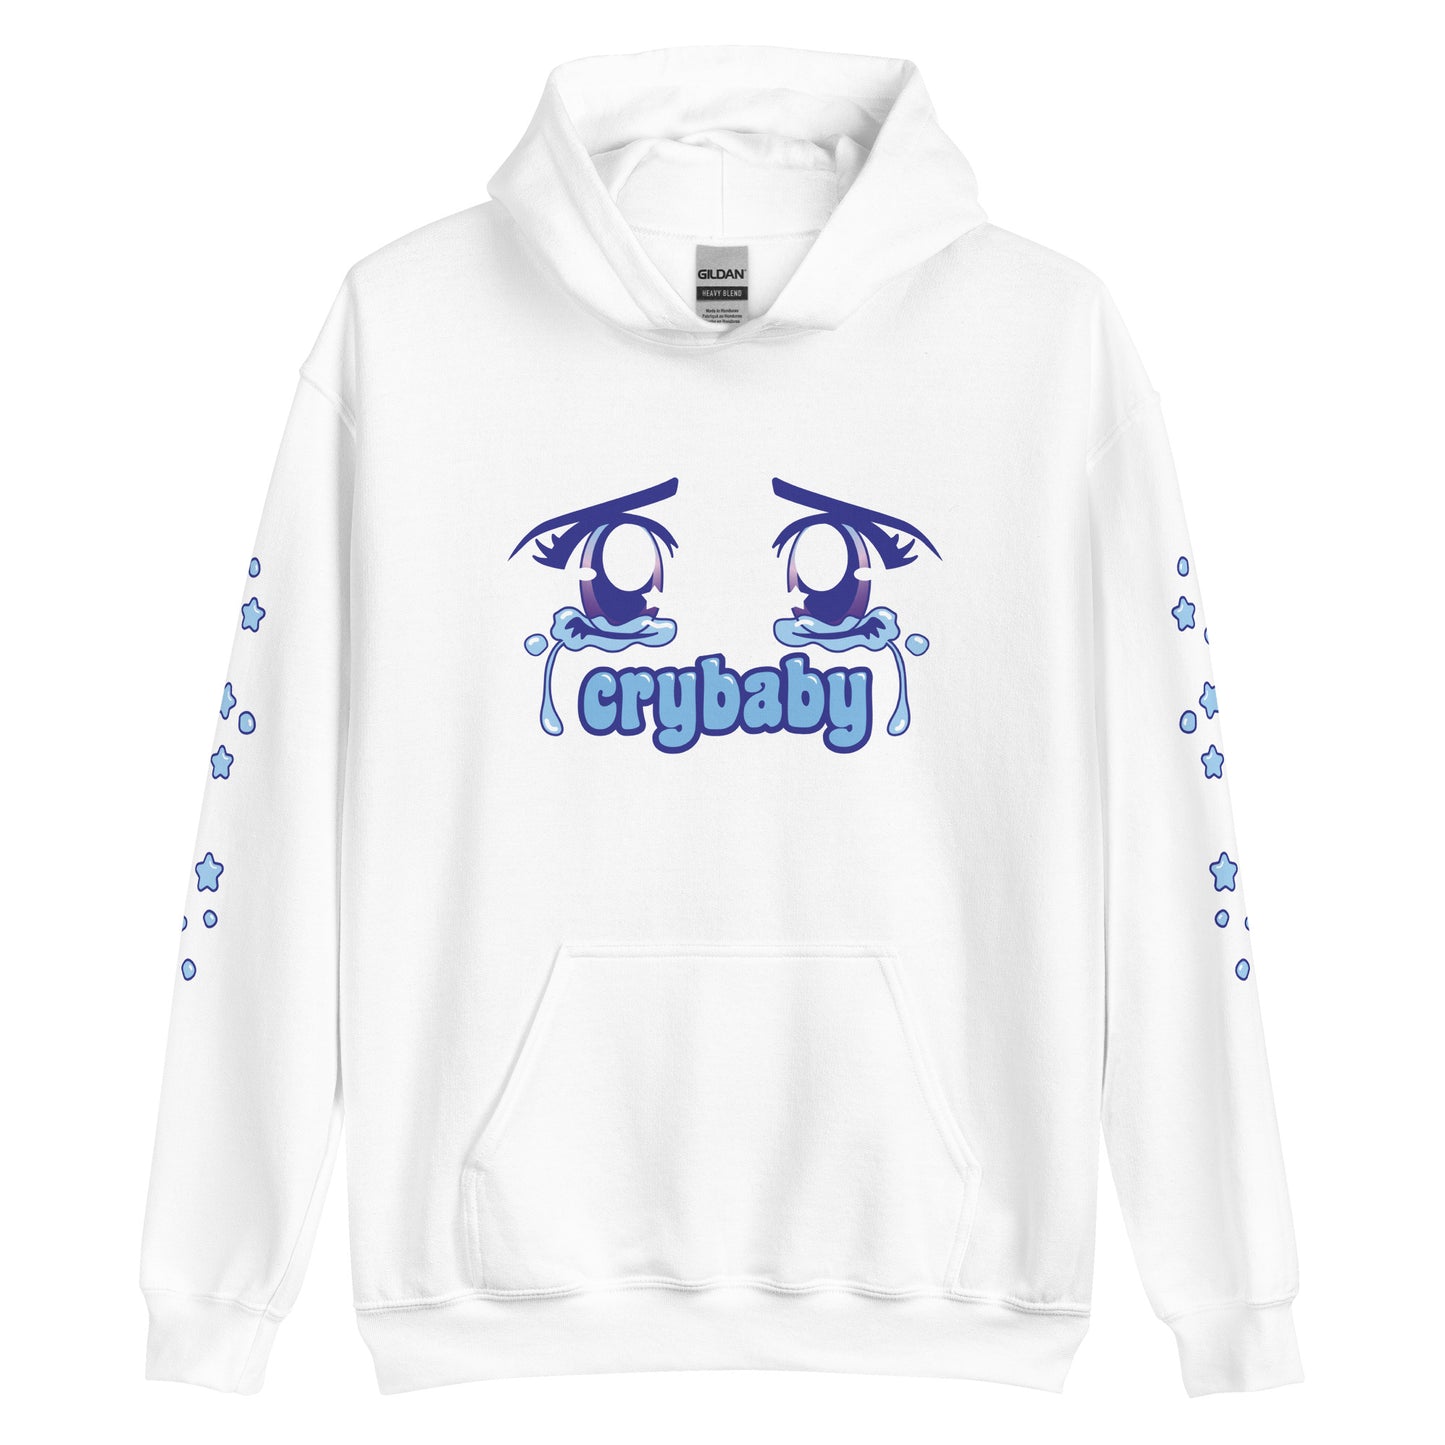 A white hooded sweatshirt featuring an image of crying anime-style eyes. Text underneath the eyes reads "crybaby". Small teardrops and stars decorate each sleeve.